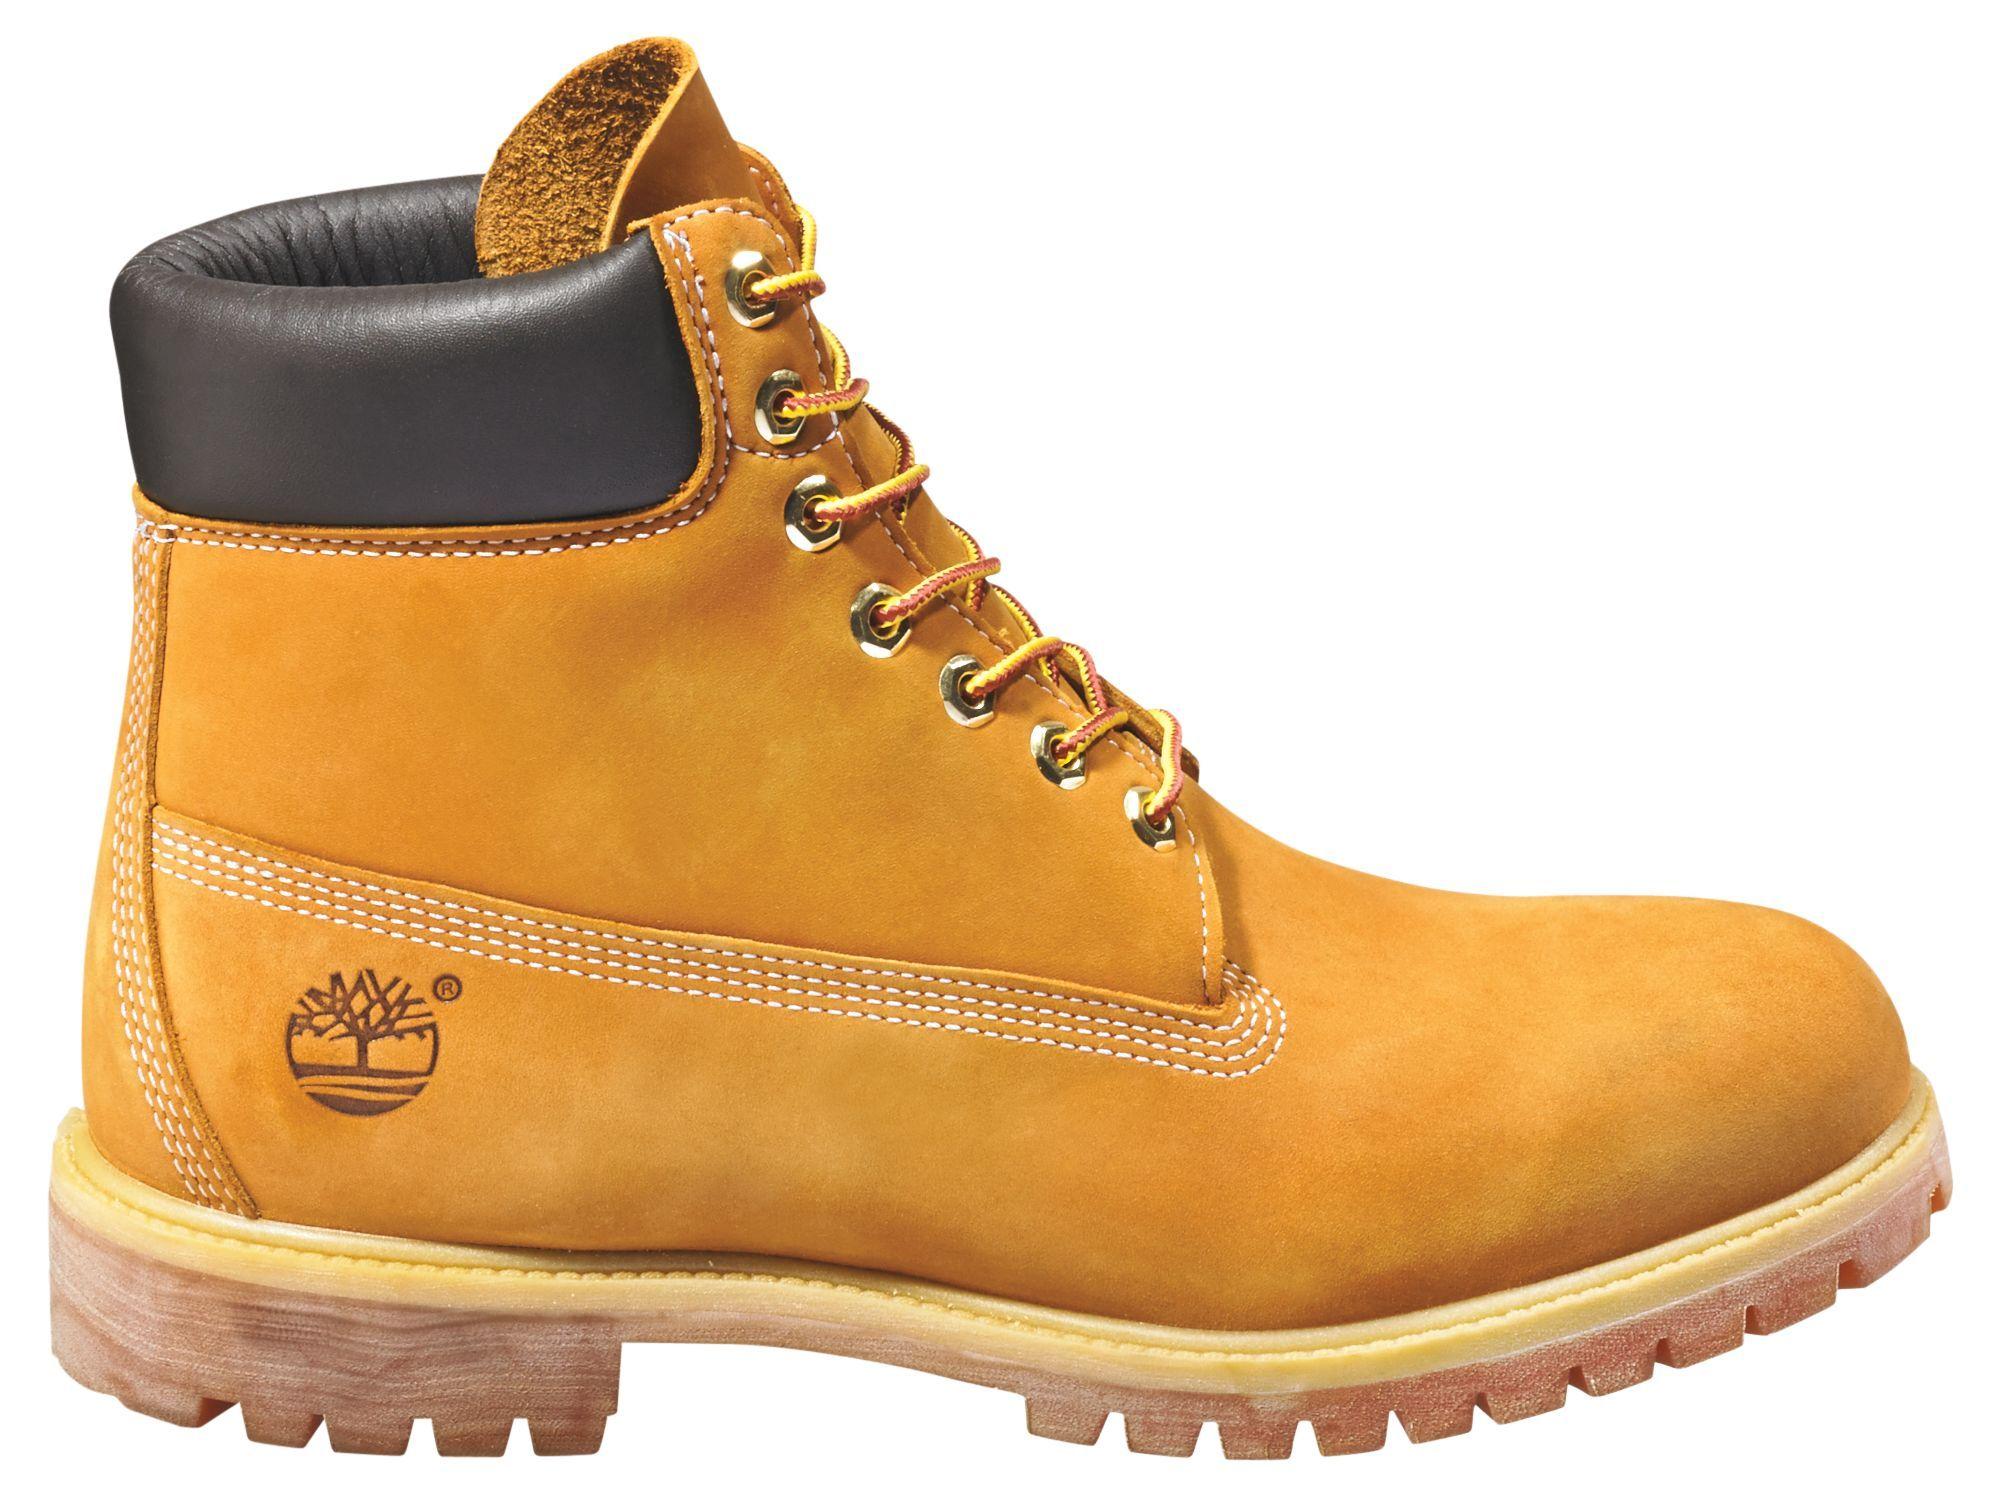 First Timberland Logo - Fake Timberland Boots? How to spot real, originals vs fake ones ...